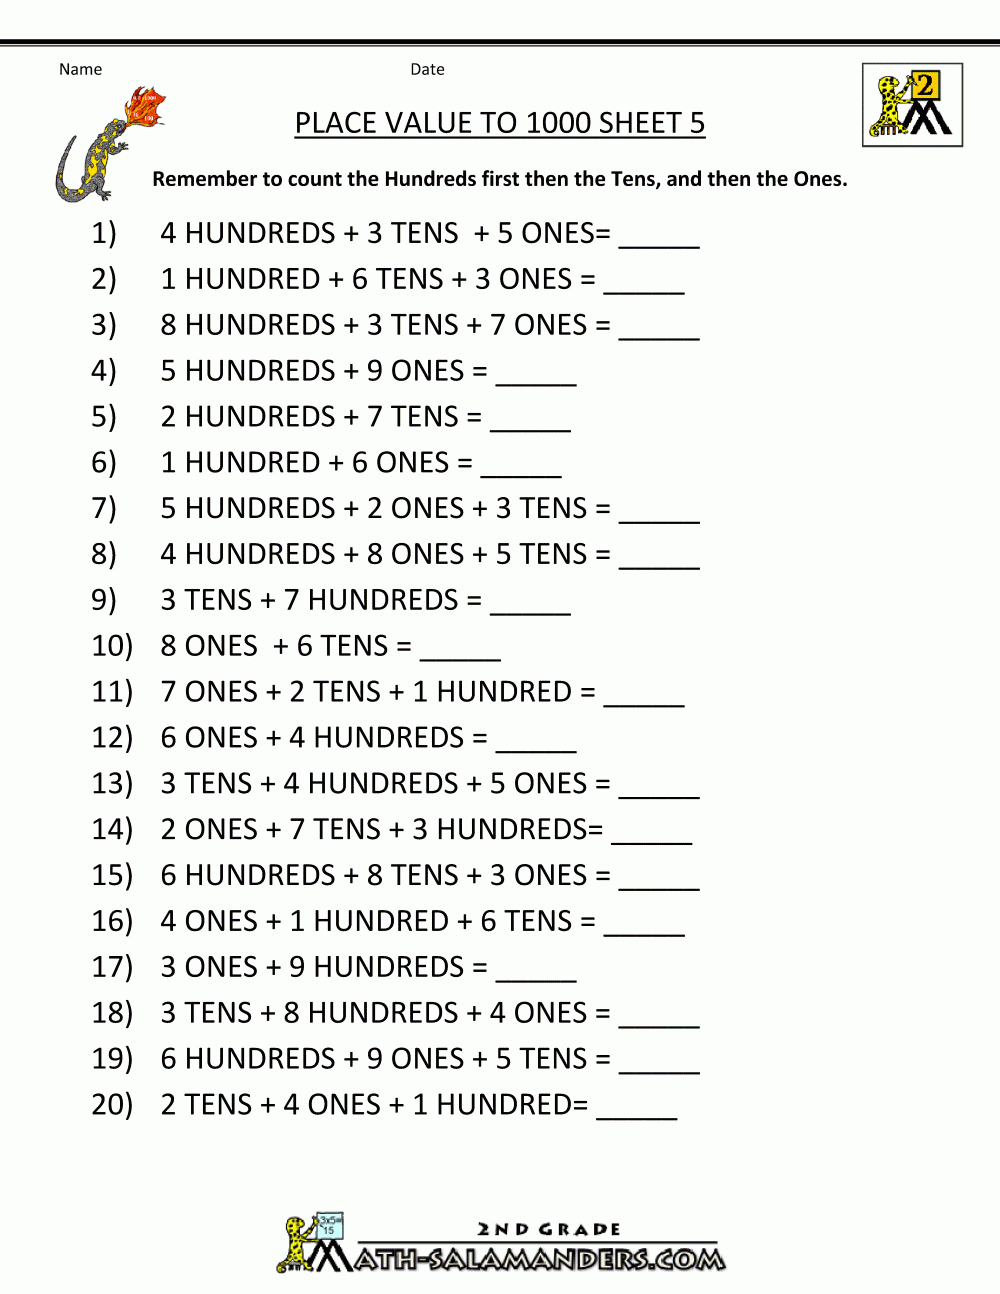 Free Place Value Worksheets To 1000 5 | School Time!!! | Place Value | Free Printable Place Value Worksheets For Fifth Grade